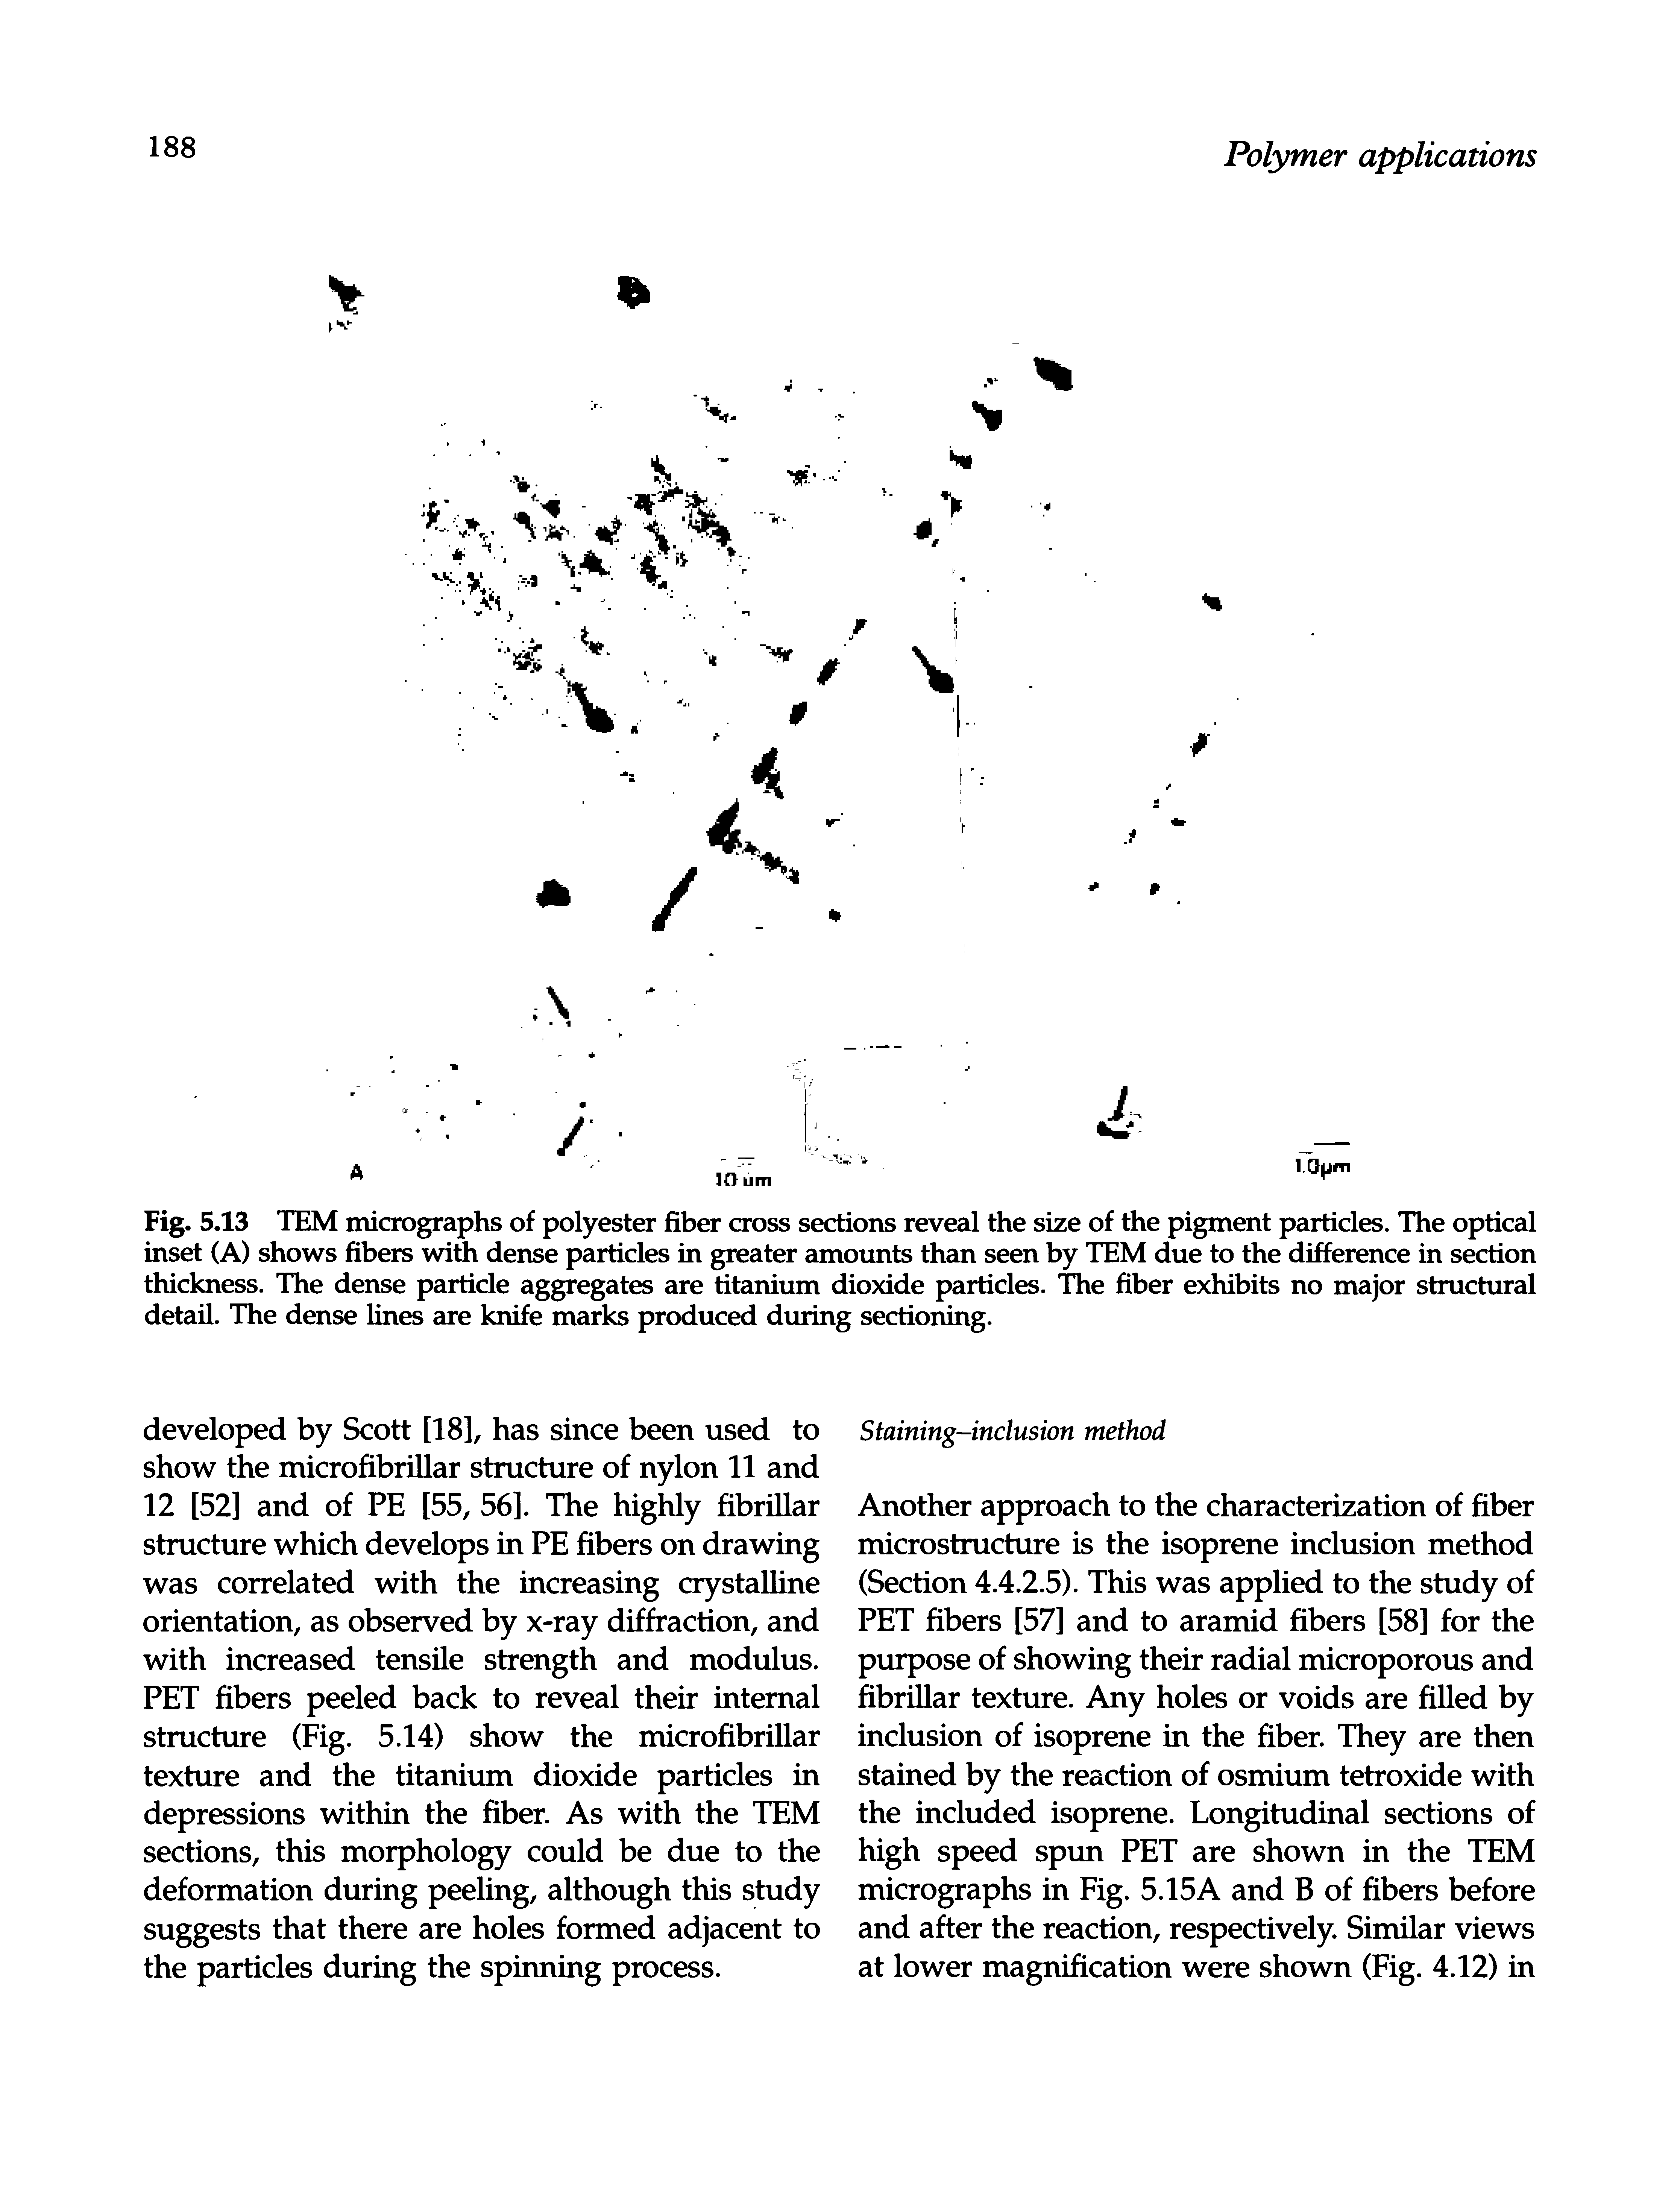 Fig. 5.13 TEM micrographs of polyester fiber cross sections reveal the size of the pigment particles. The optical inset (A) shows fibers with dense particles in greater amounts than seen by TEM due to the difference in section thickness. The dense particle aggregates are titanium dioxide particles. The fiber exhibits no major structural detail. The dense lines are knife marks produced during sectioning.